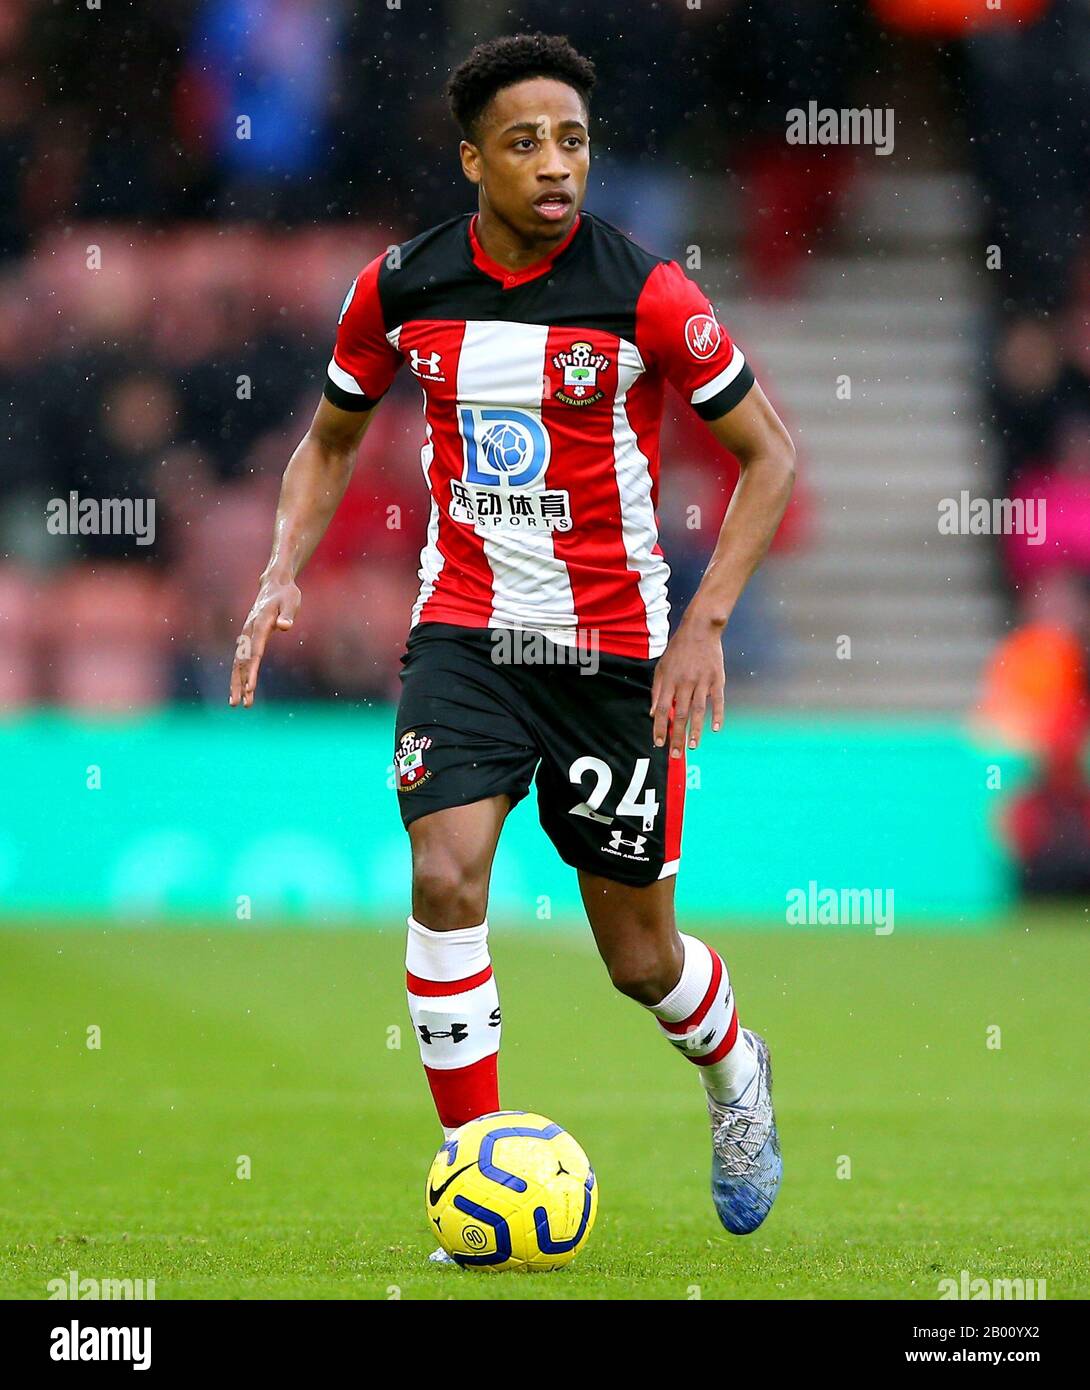 hegn Føderale møl Southampton's Kyle Walker-Peters in action during the Premier League match  at St Mary's Stadium, Southampton Stock Photo - Alamy